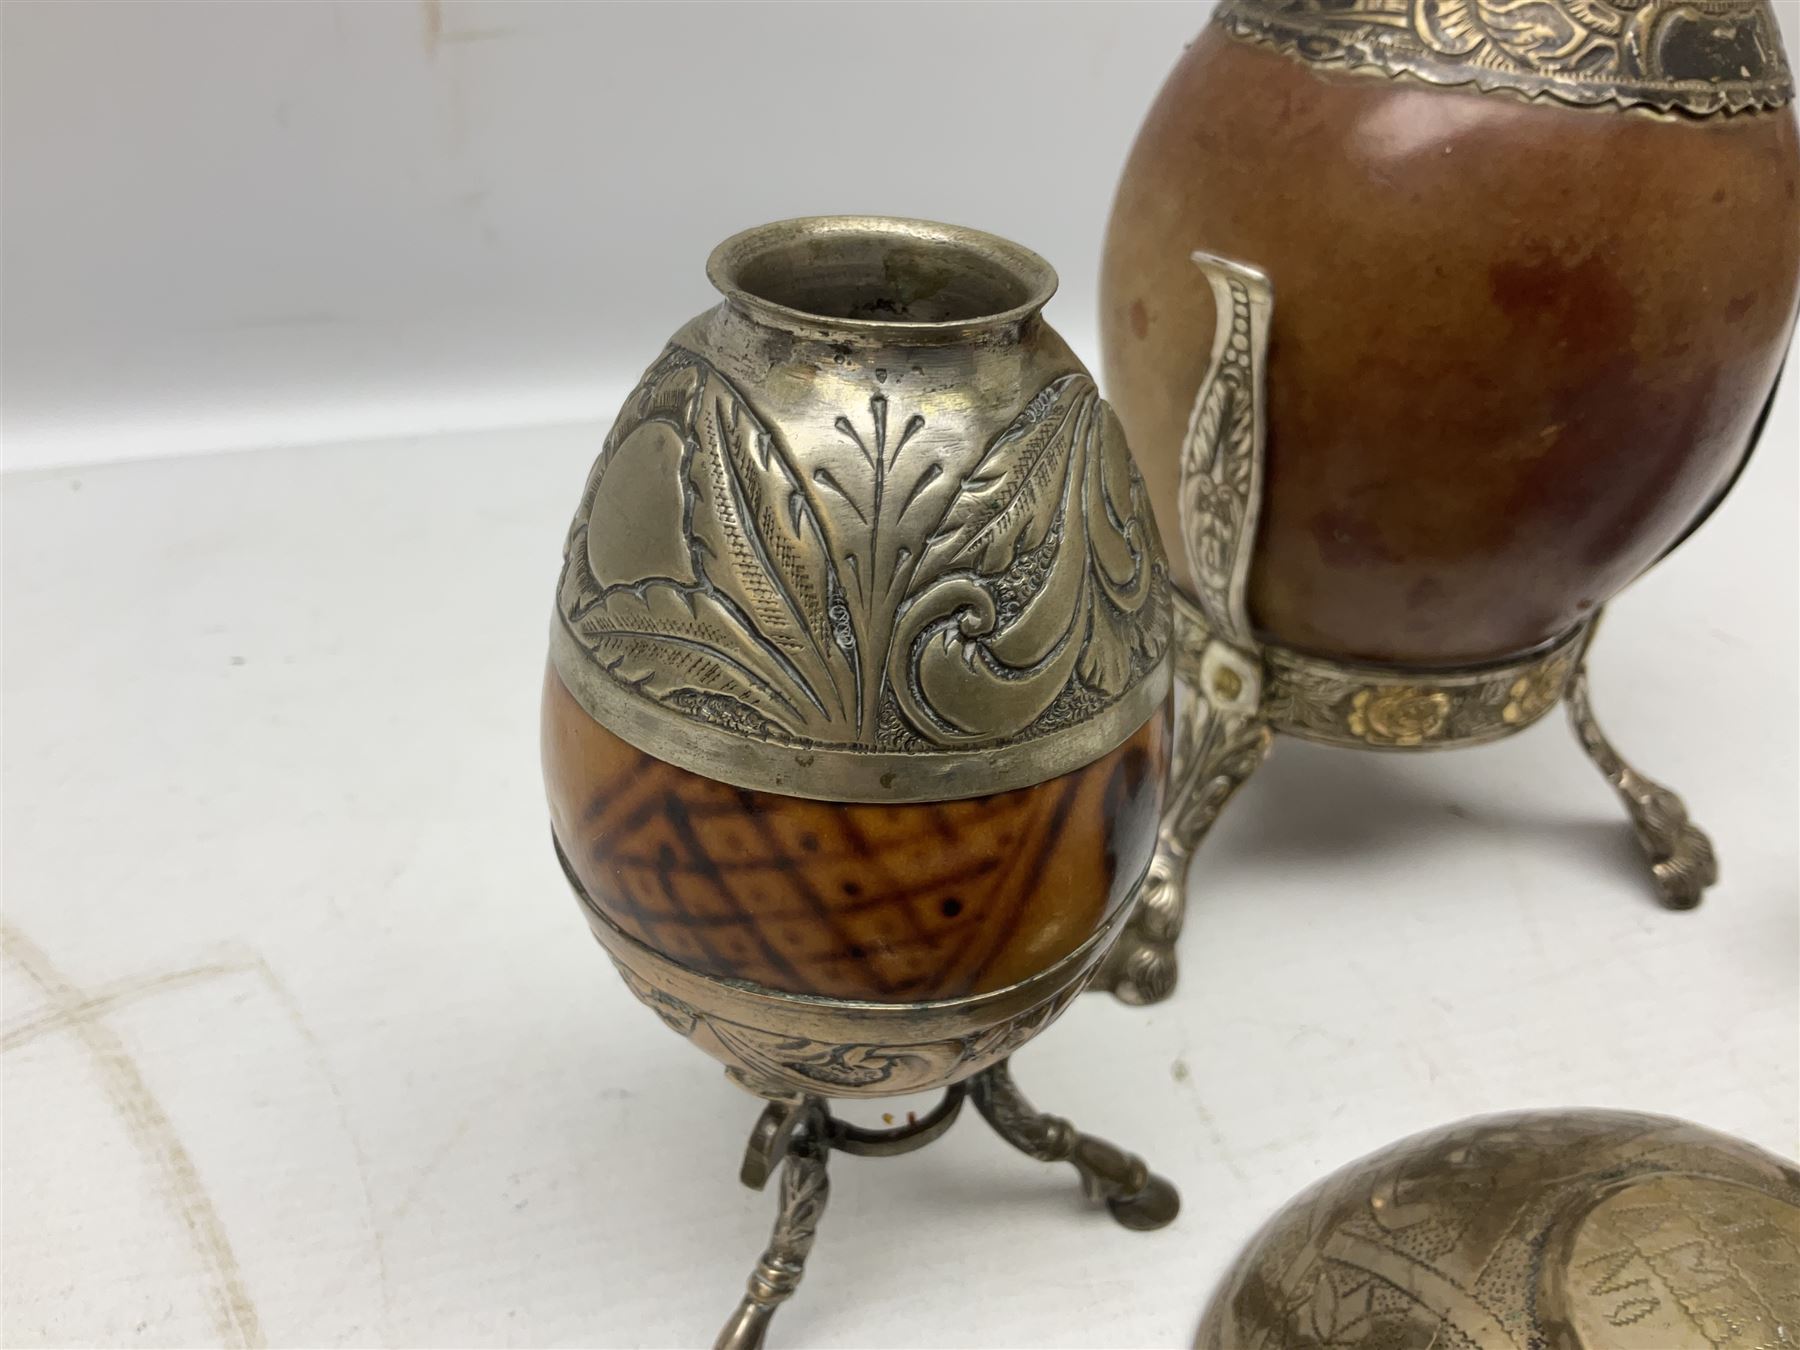 Yerba mate tea gourd calabash cup with silver-plated foliate mounts raised upon three hoof feet - Image 7 of 11